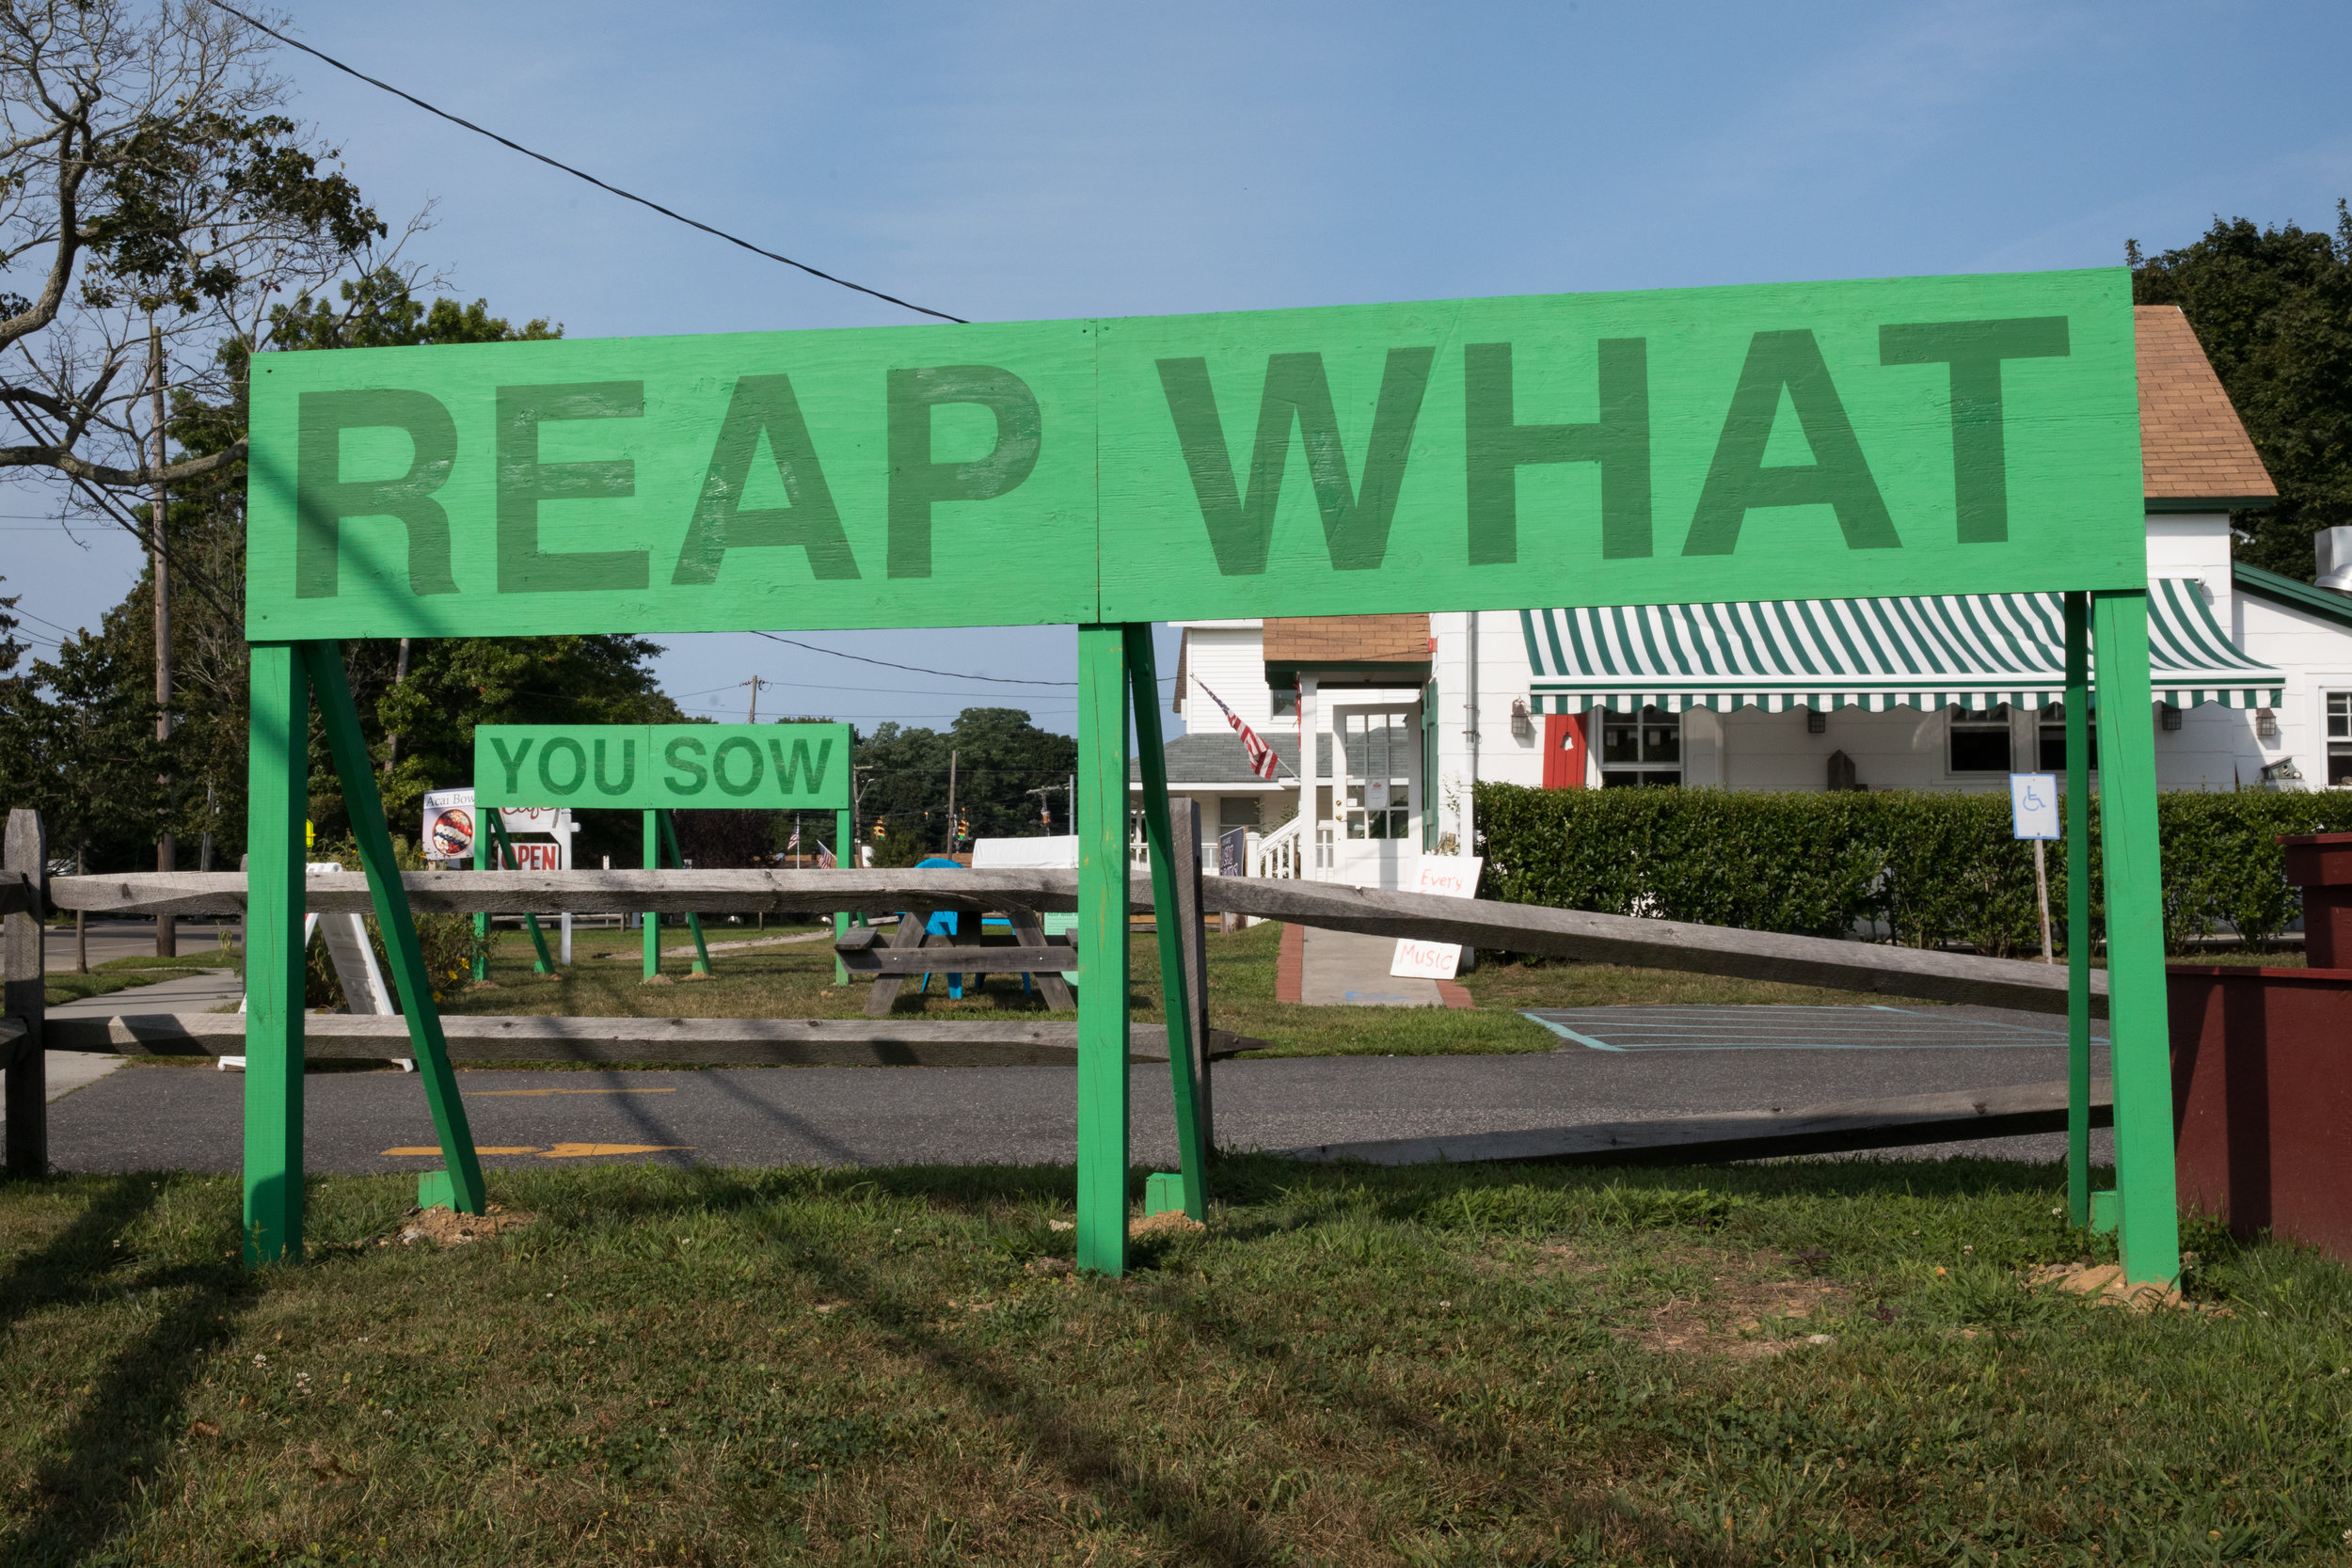   Reap What You Sow,  2017 ,  Auto Body. &nbsp; &nbsp;Photo by Jenny Gorman 